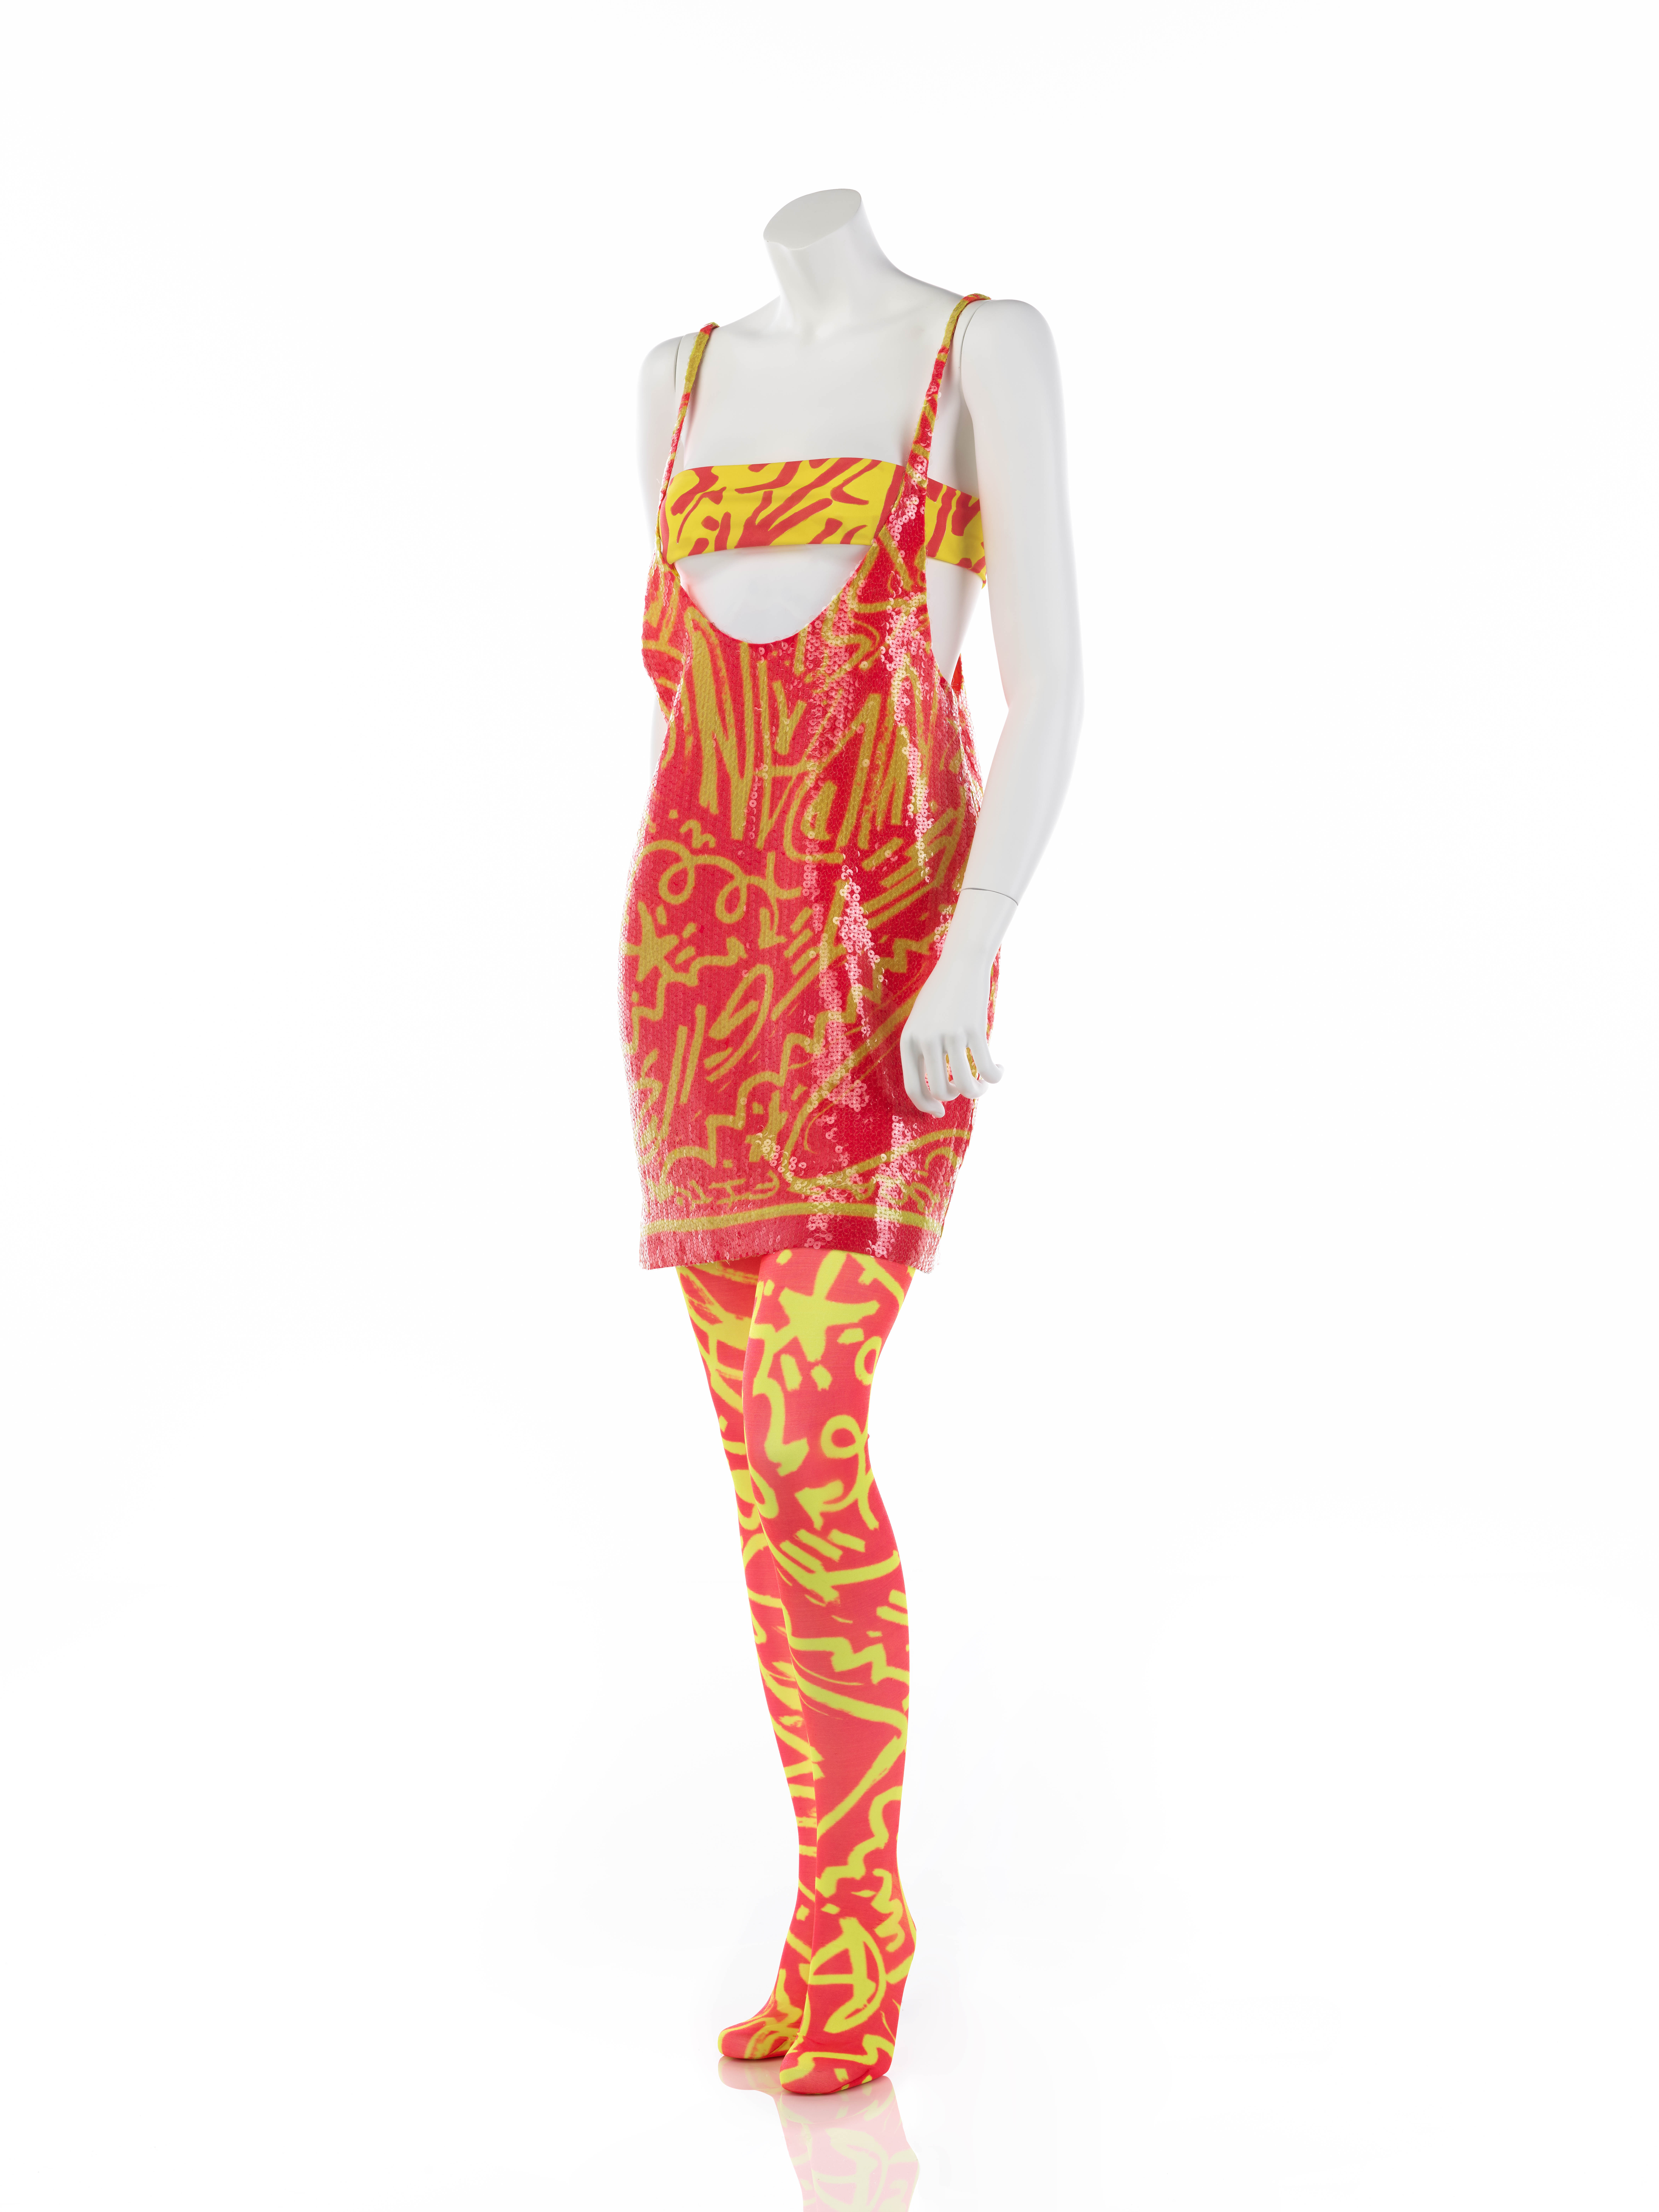 picture of a neon orange and yellow graffiti dress with matching tights a a bandeau designed by stephen sprouse